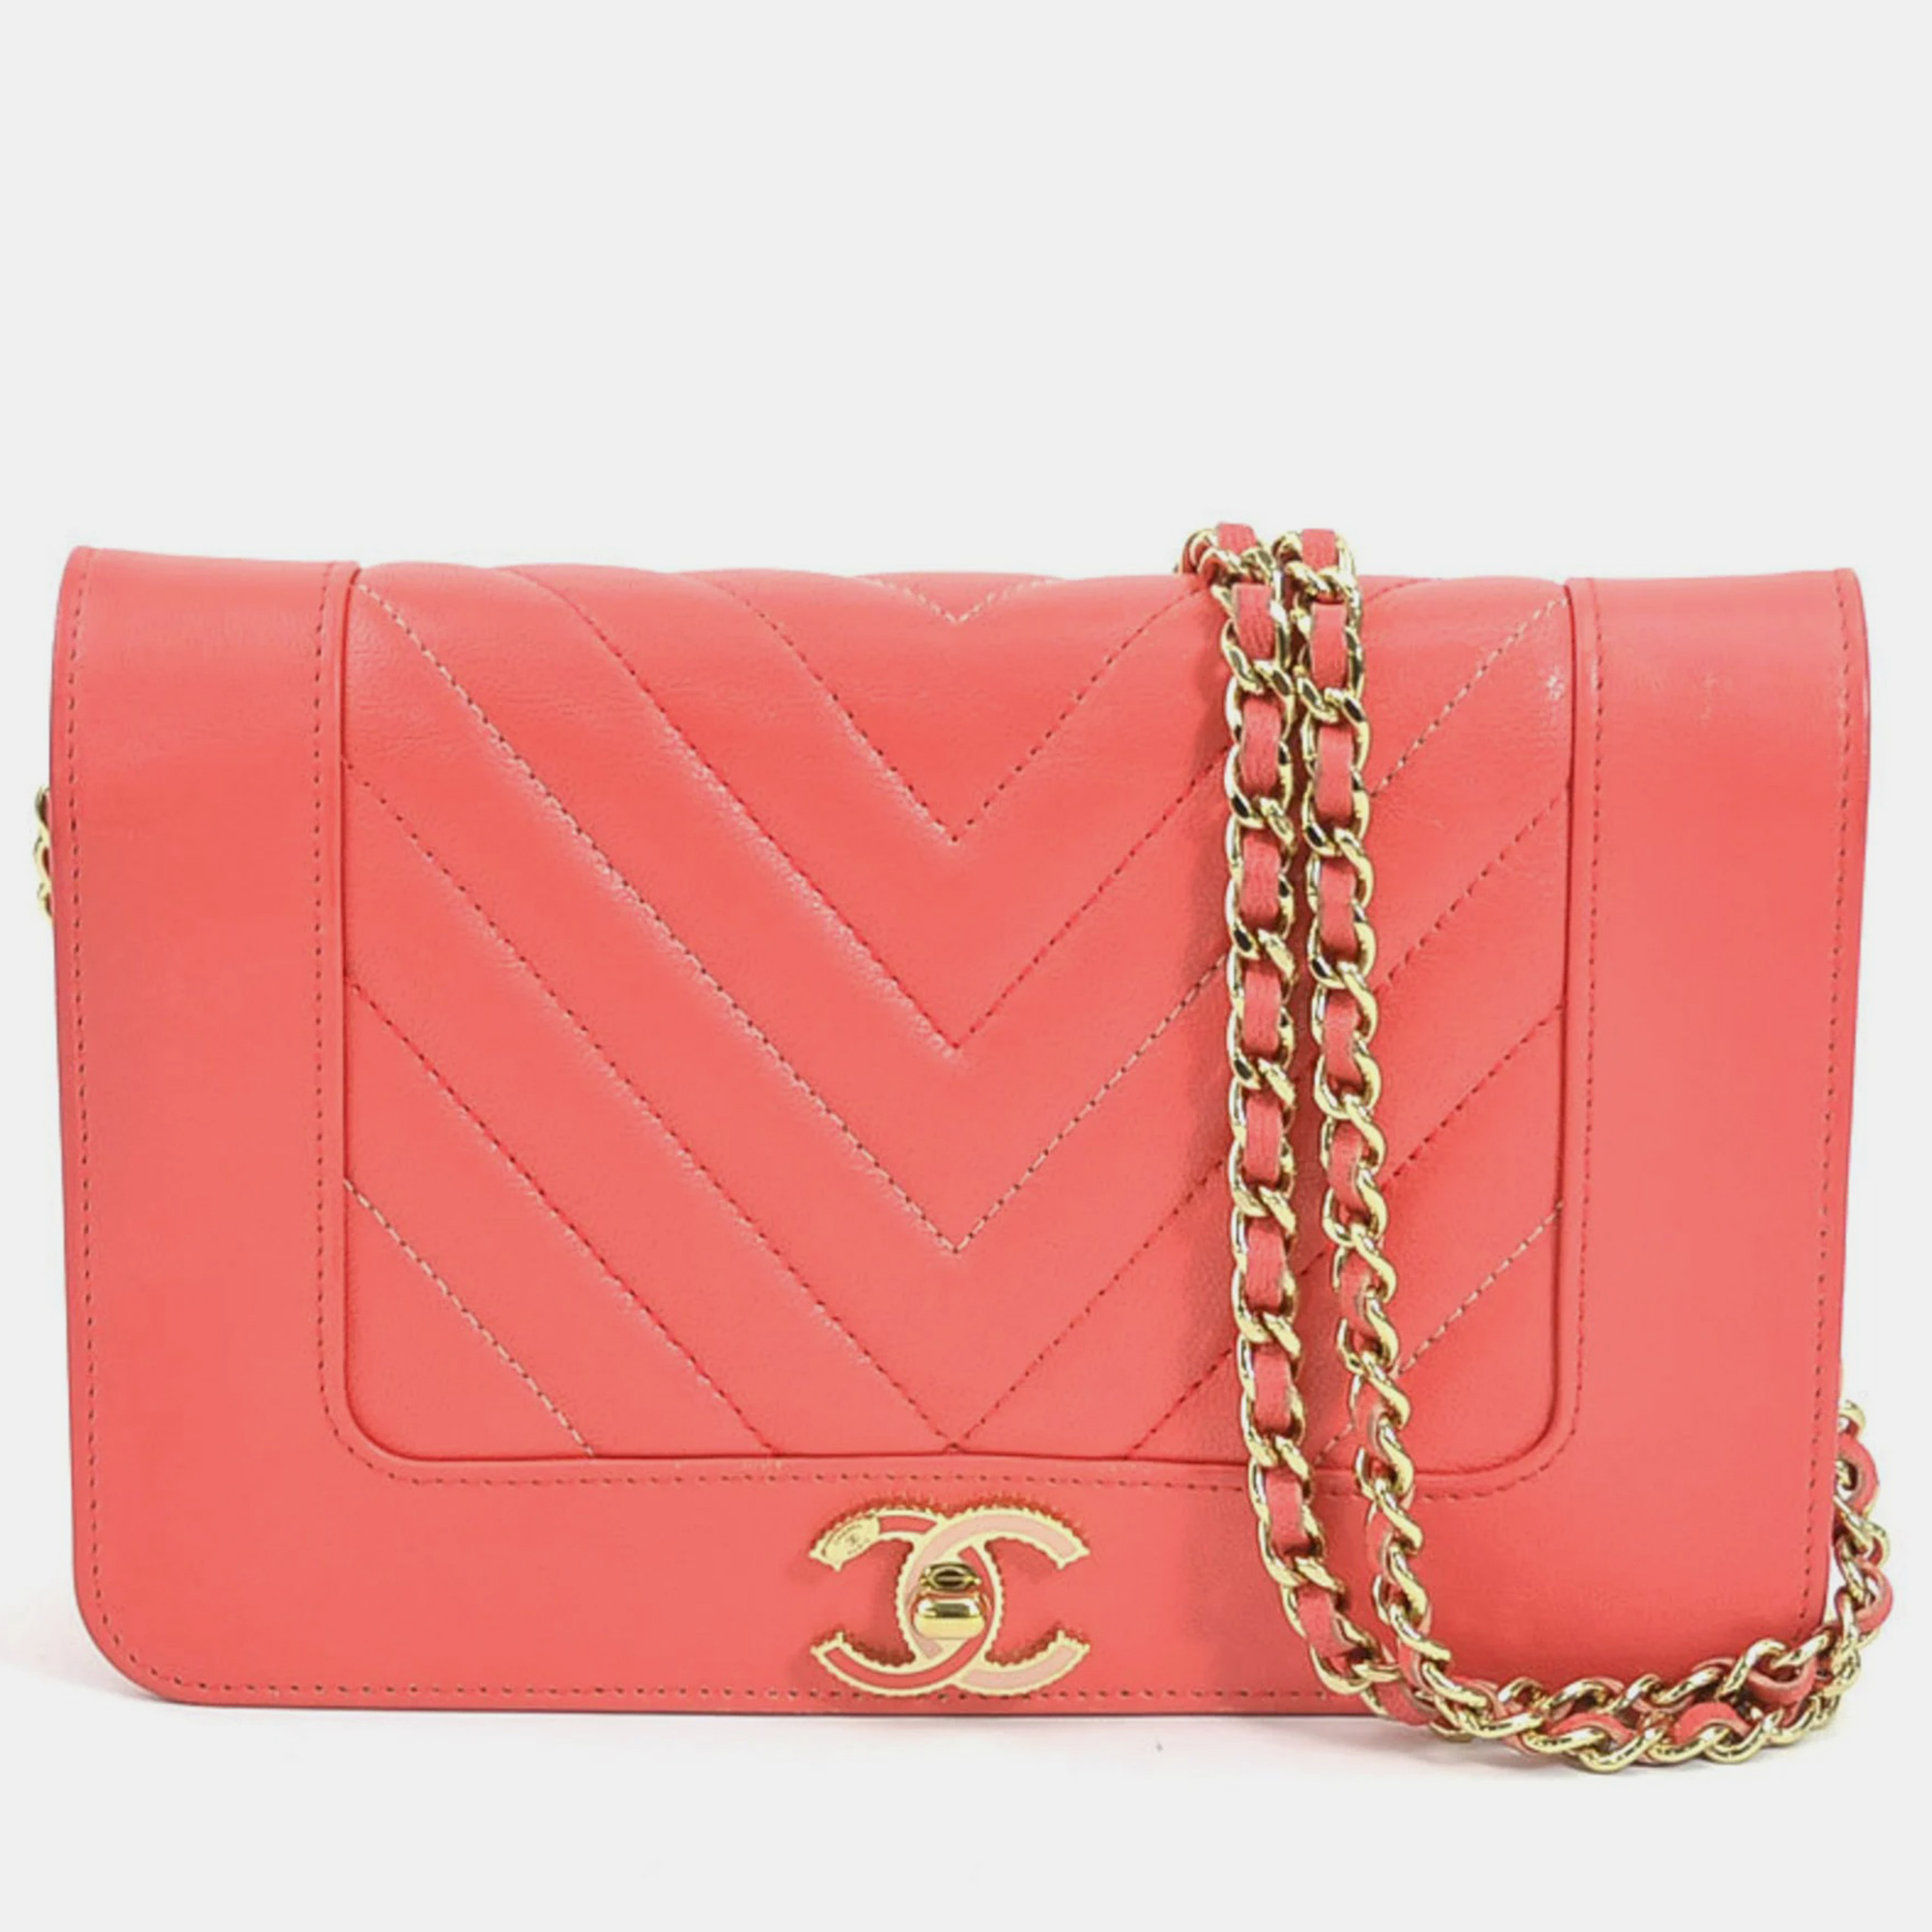 Chanel coral leather mademoiselle vintage wallet on chain